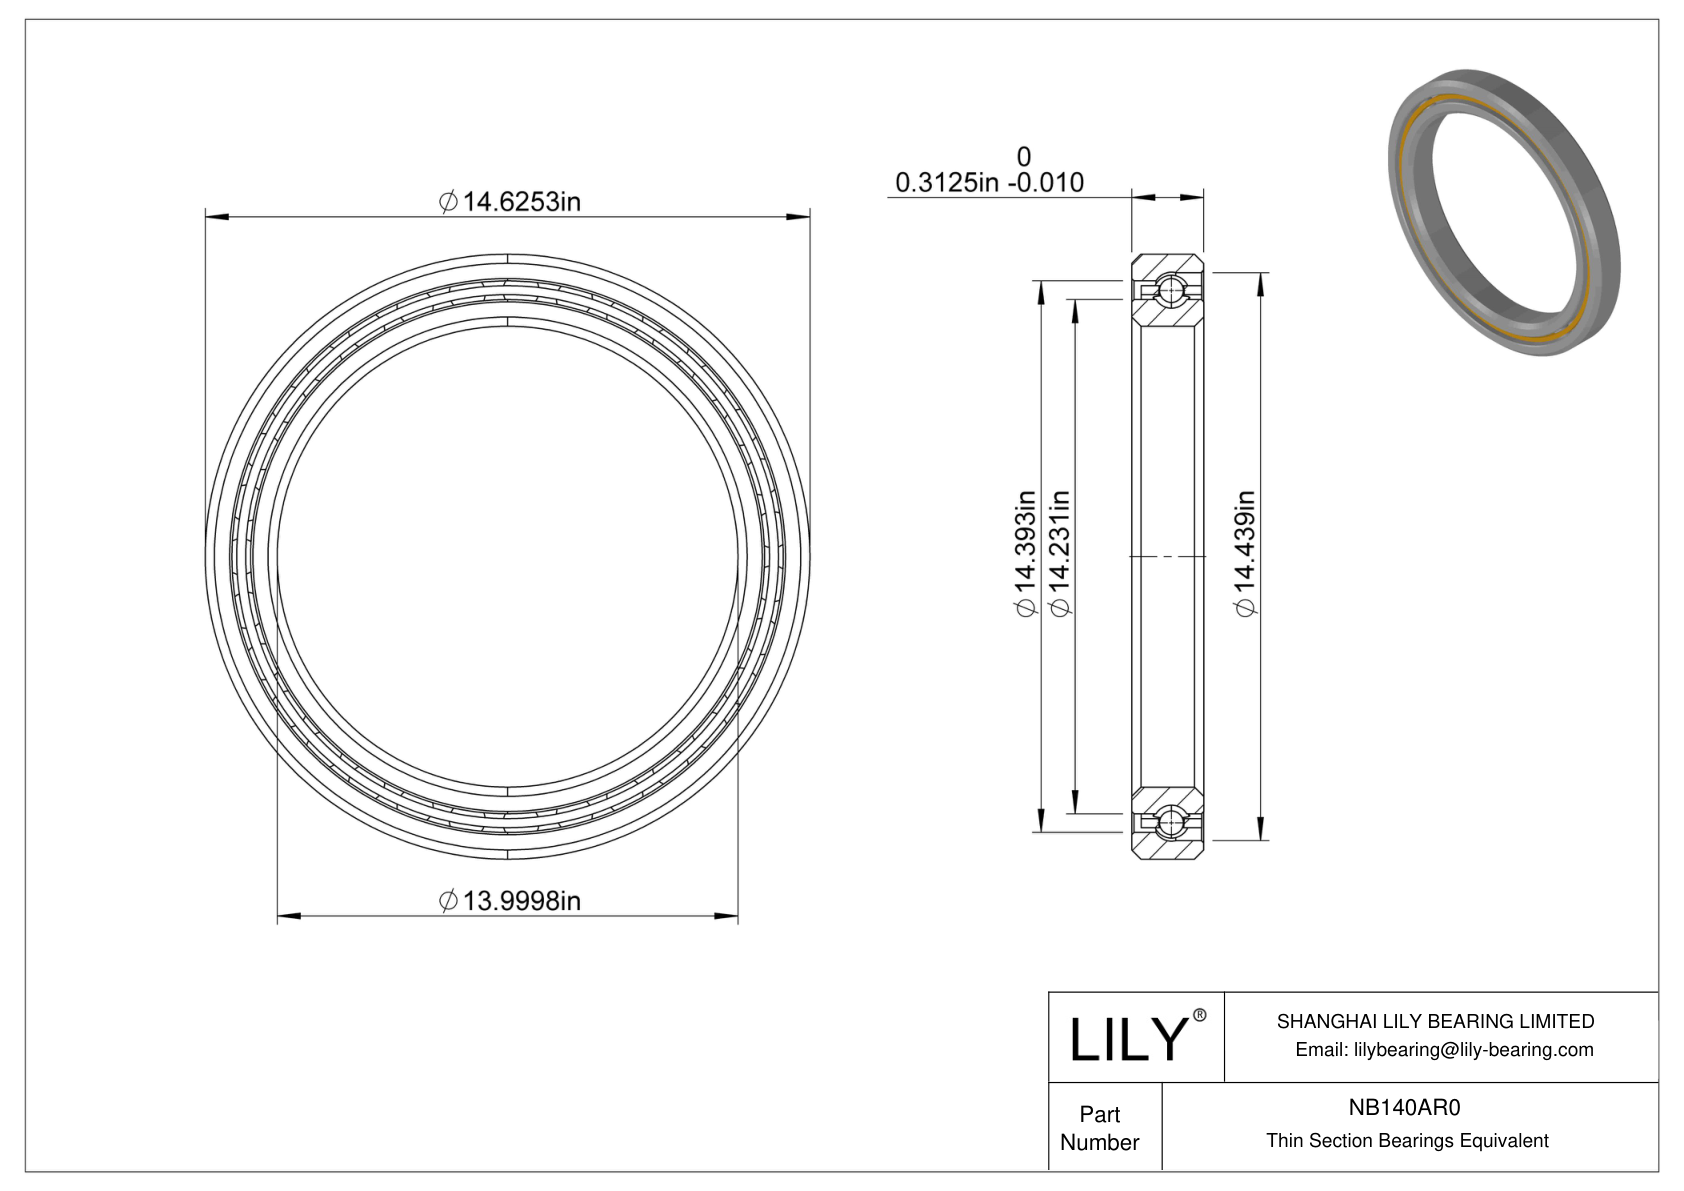 NB140AR0 Constant Section (CS) Bearings cad drawing